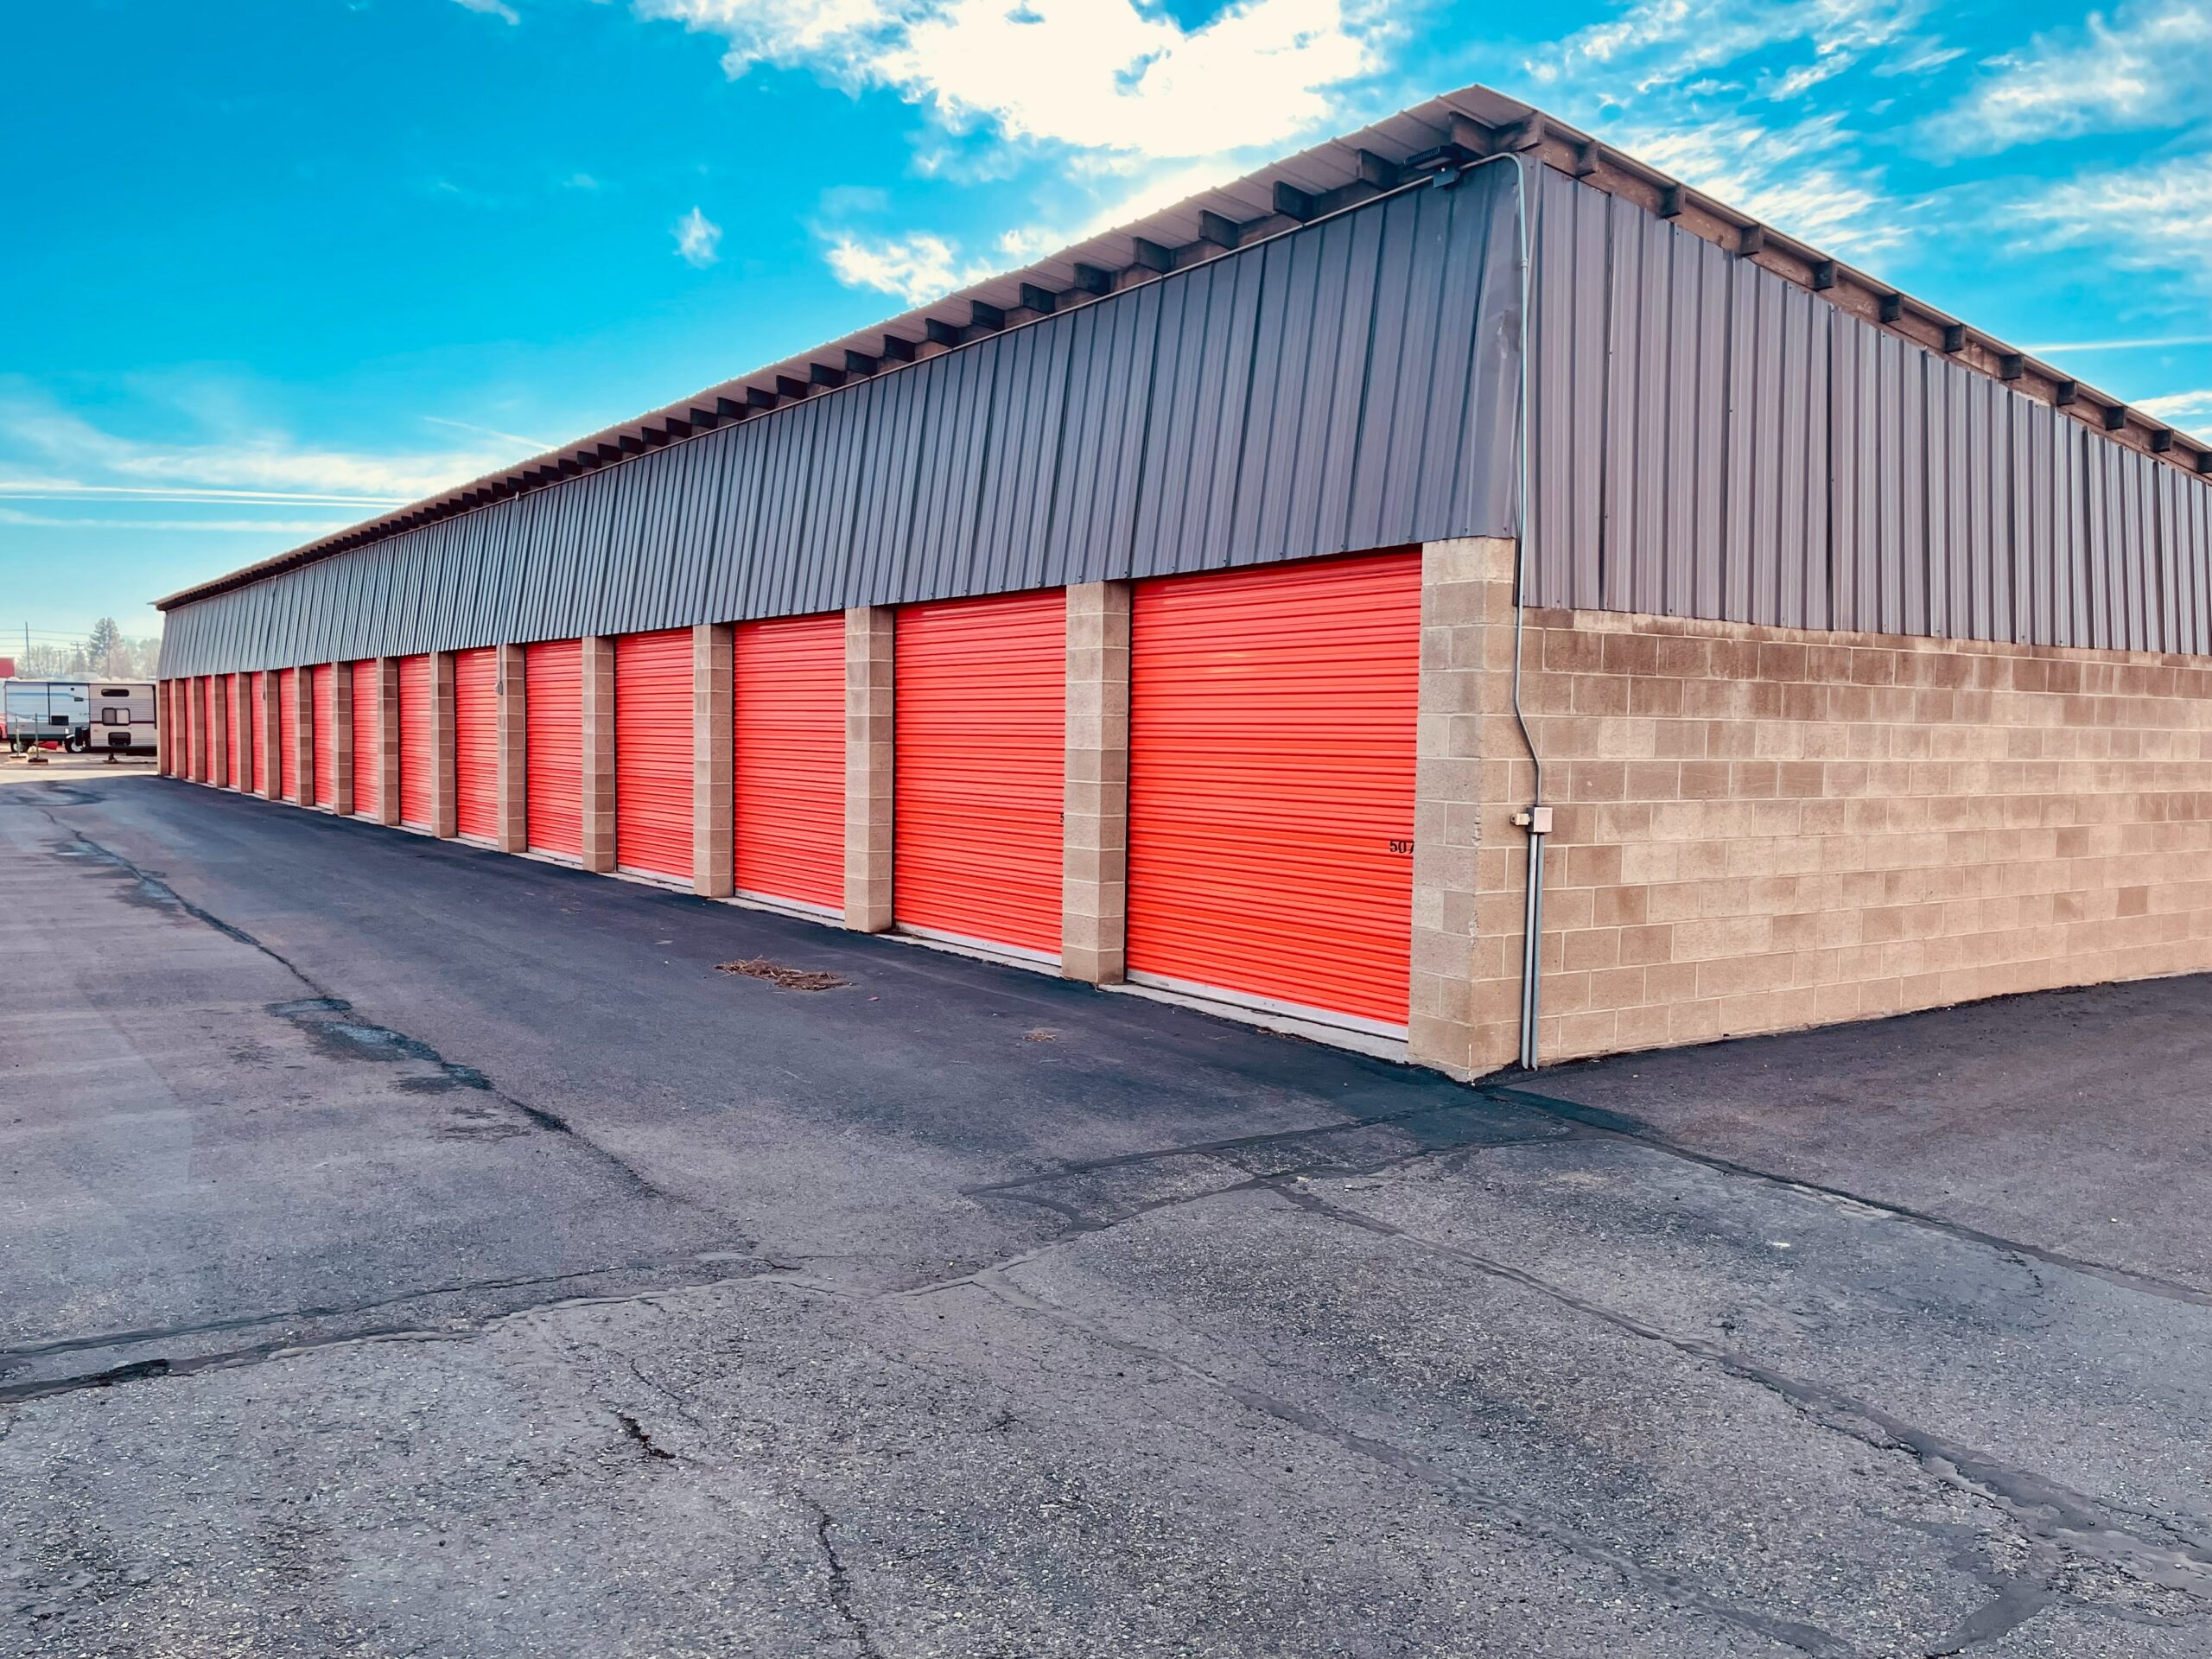 Self storage units in a parking lot equipped with security cameras.